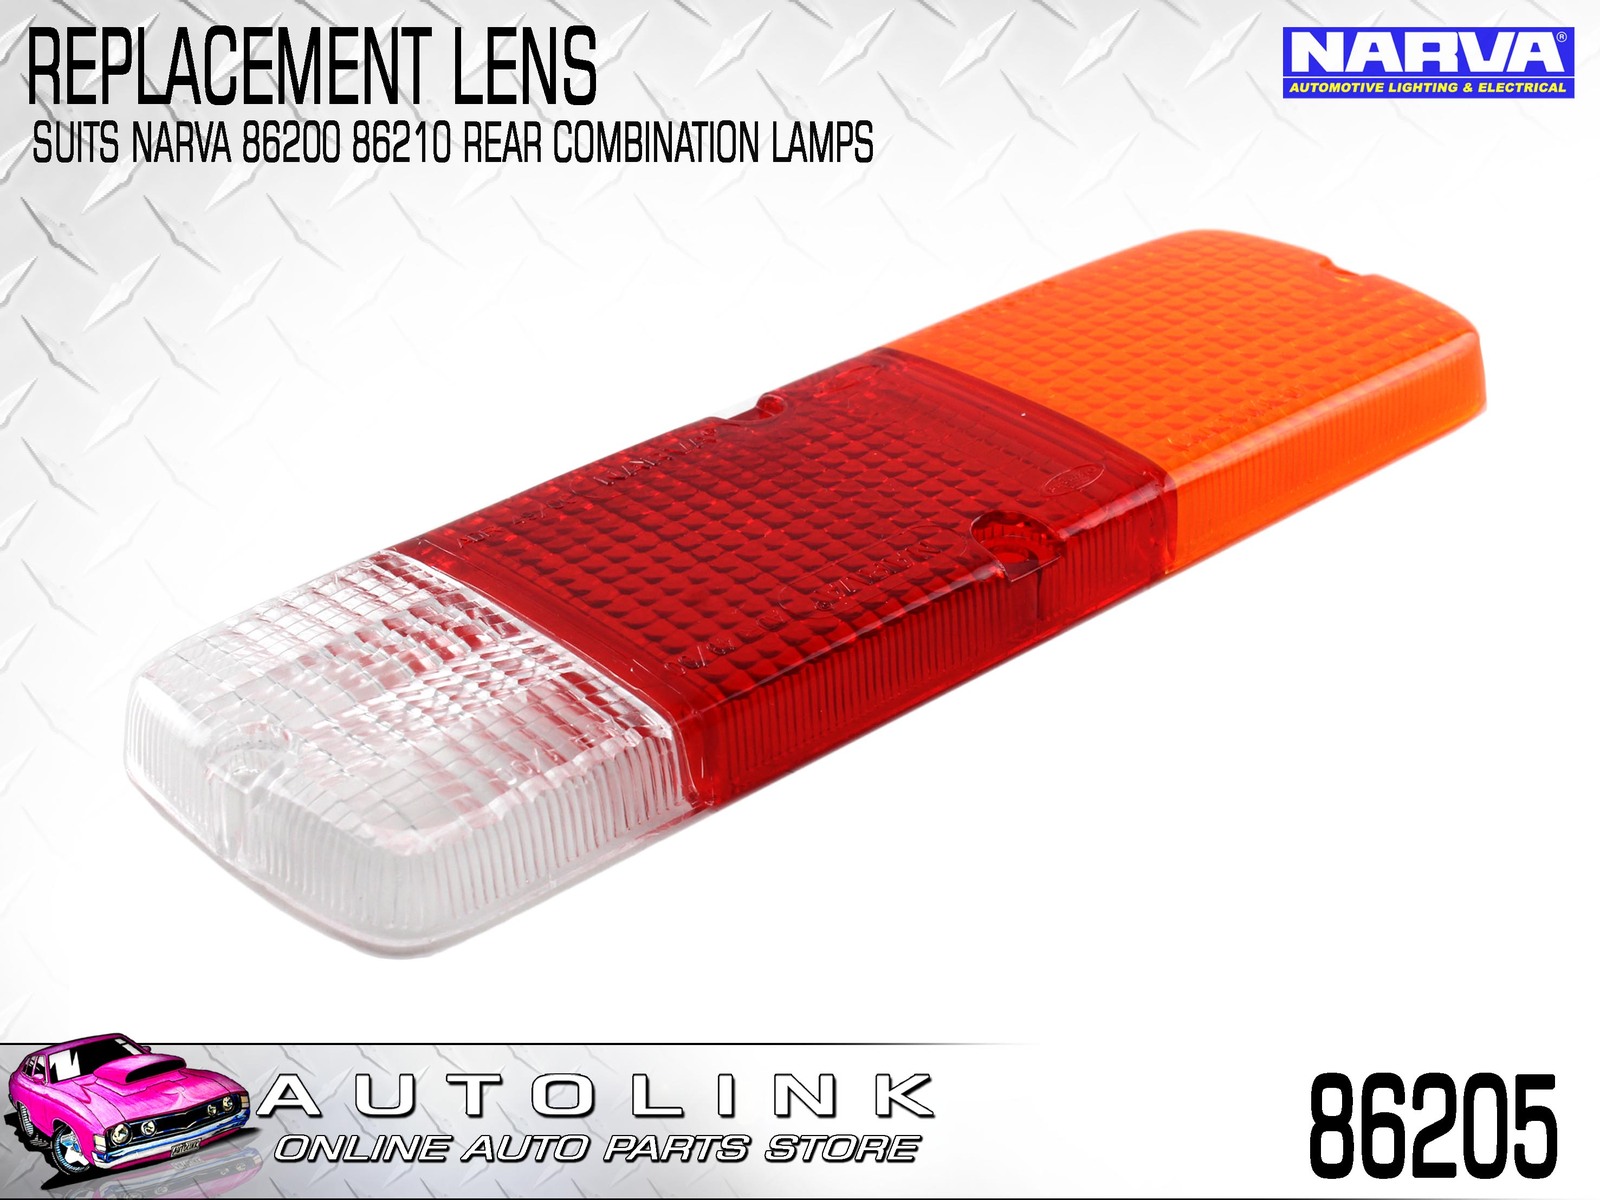 NARVA REAR COMBINATION LAMP REPLACEMENT LENS SUITS 86200 86210 LAMPS  86205